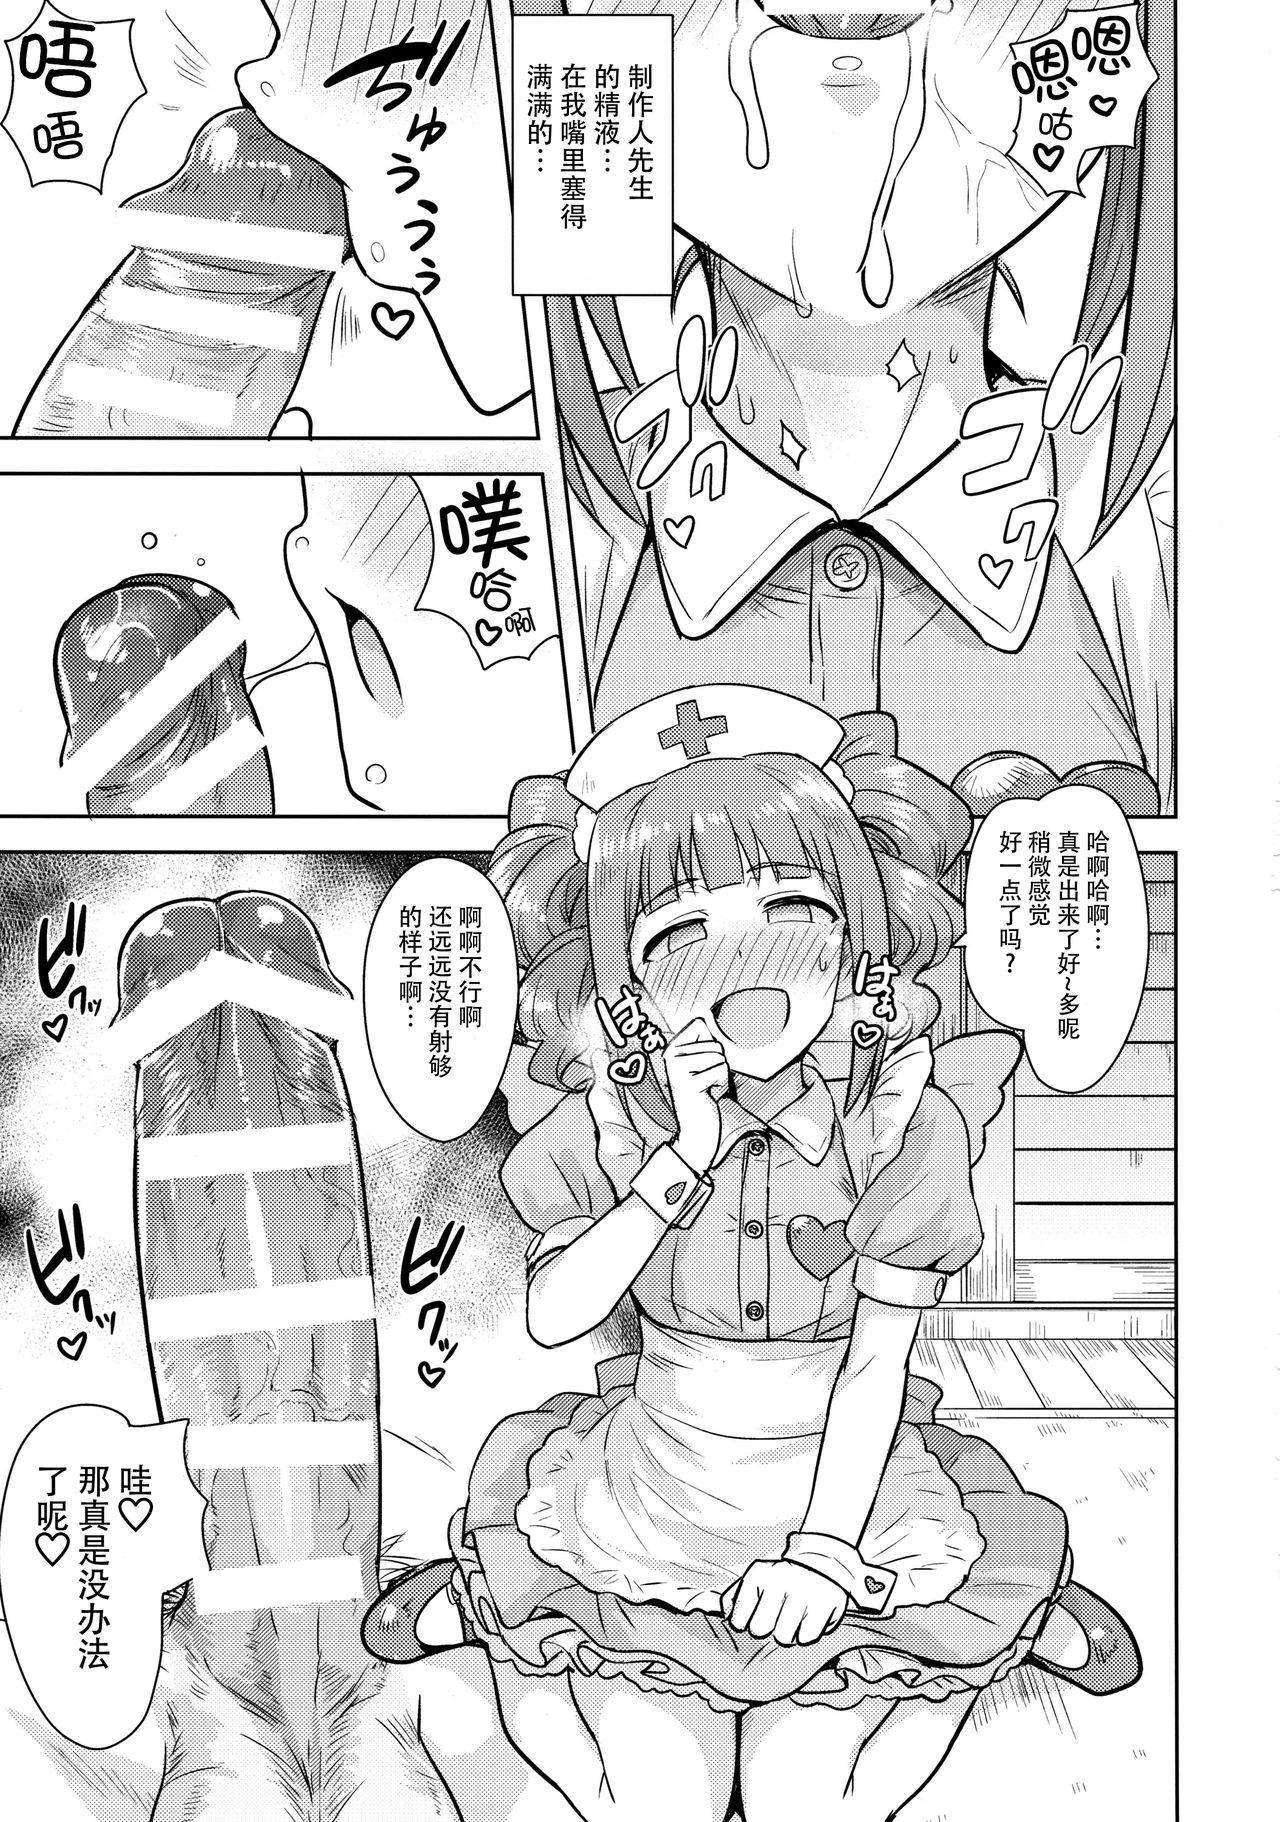 Joven Yayoi to Issho 3 - The idolmaster Extreme - Page 11